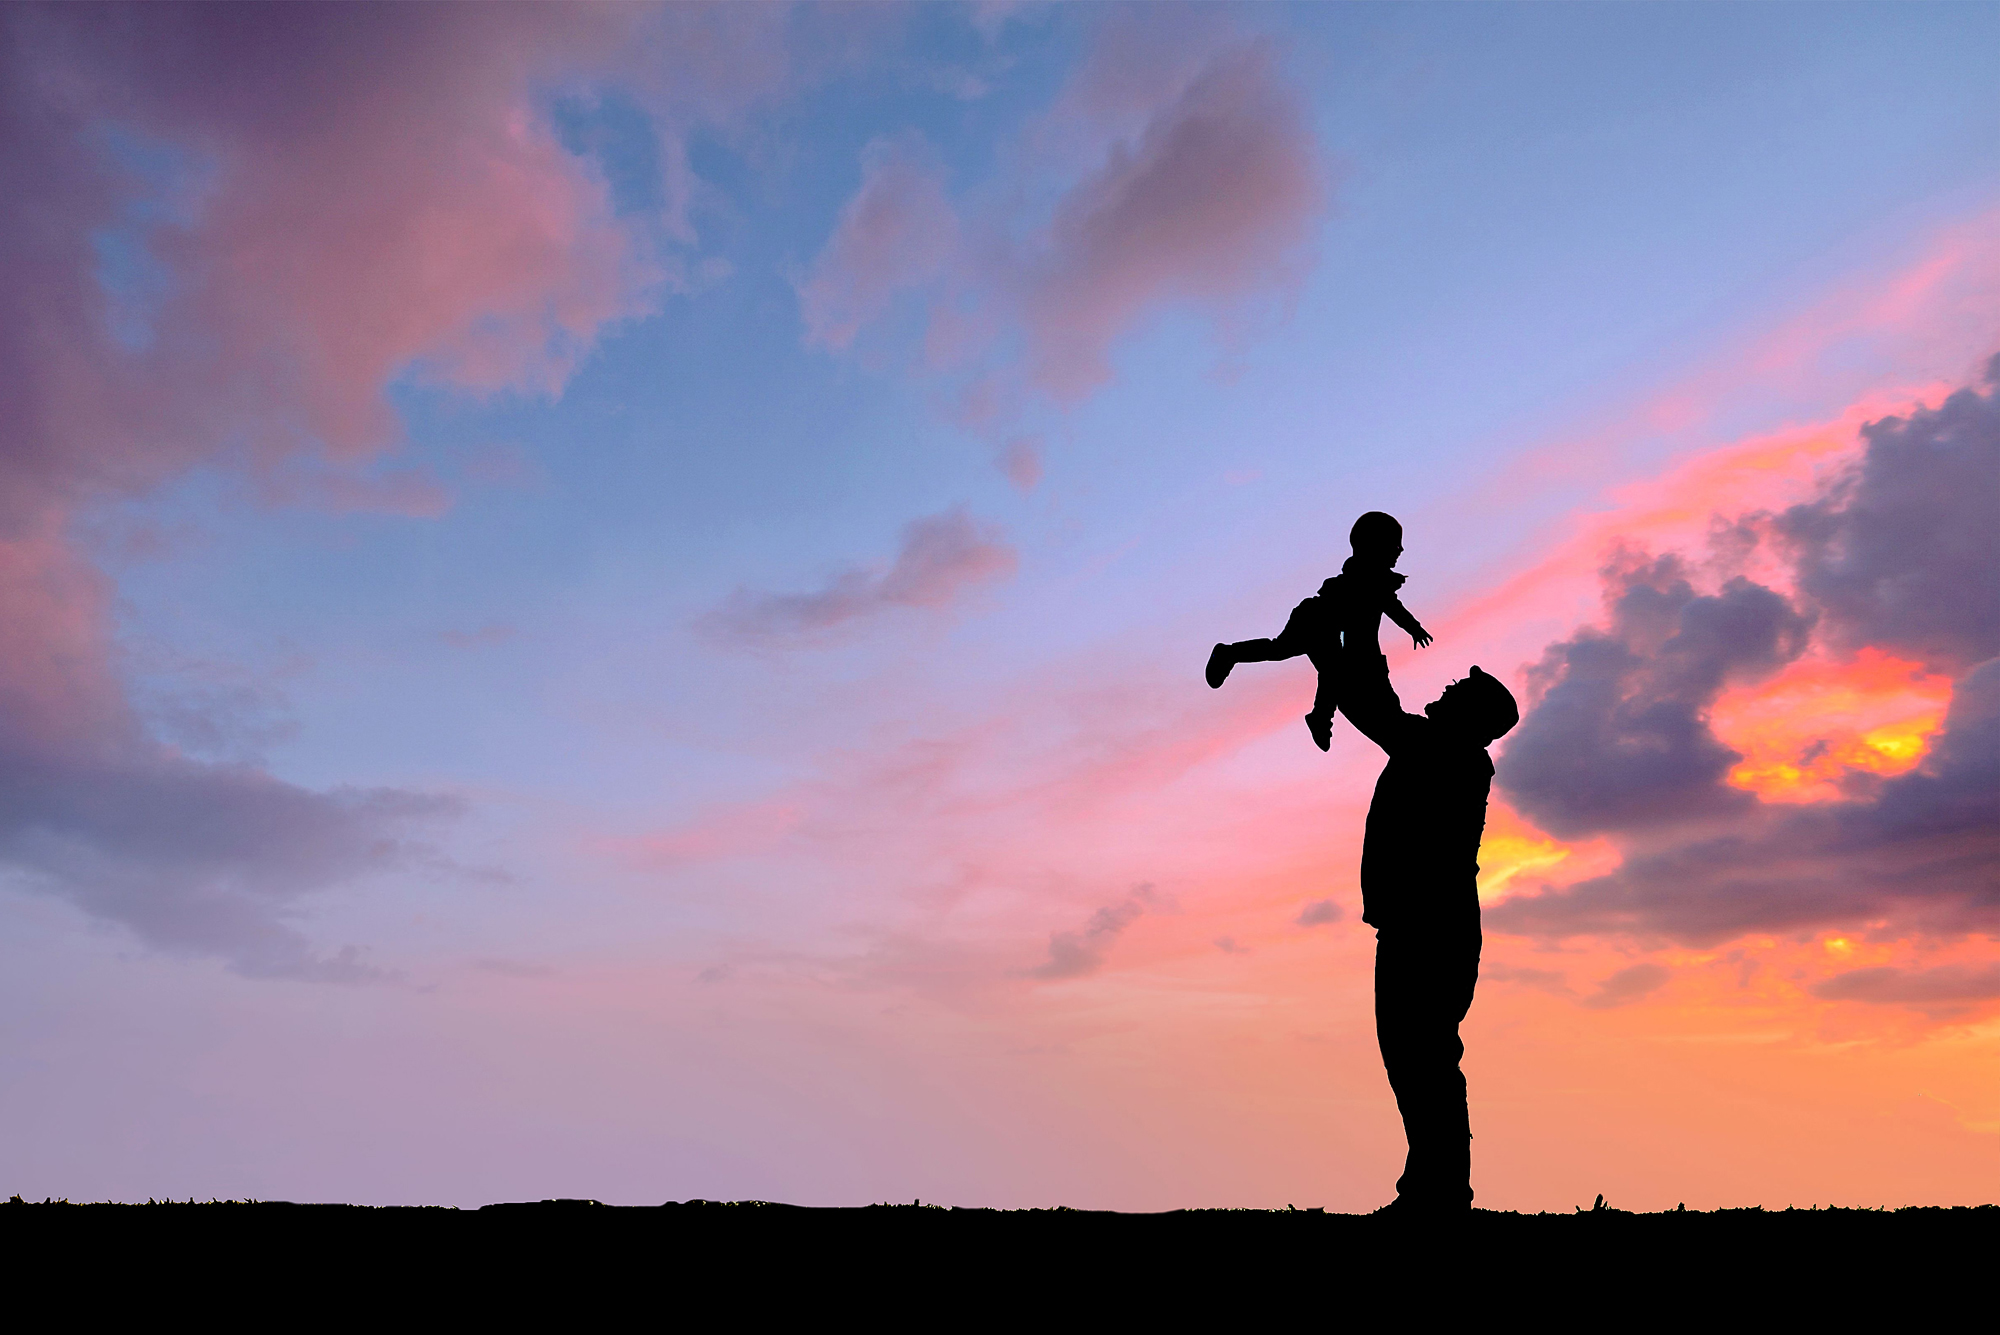 st-louis-family-photographer-mini-session-sunset-silhouette-with-dad-and-baby.jpg